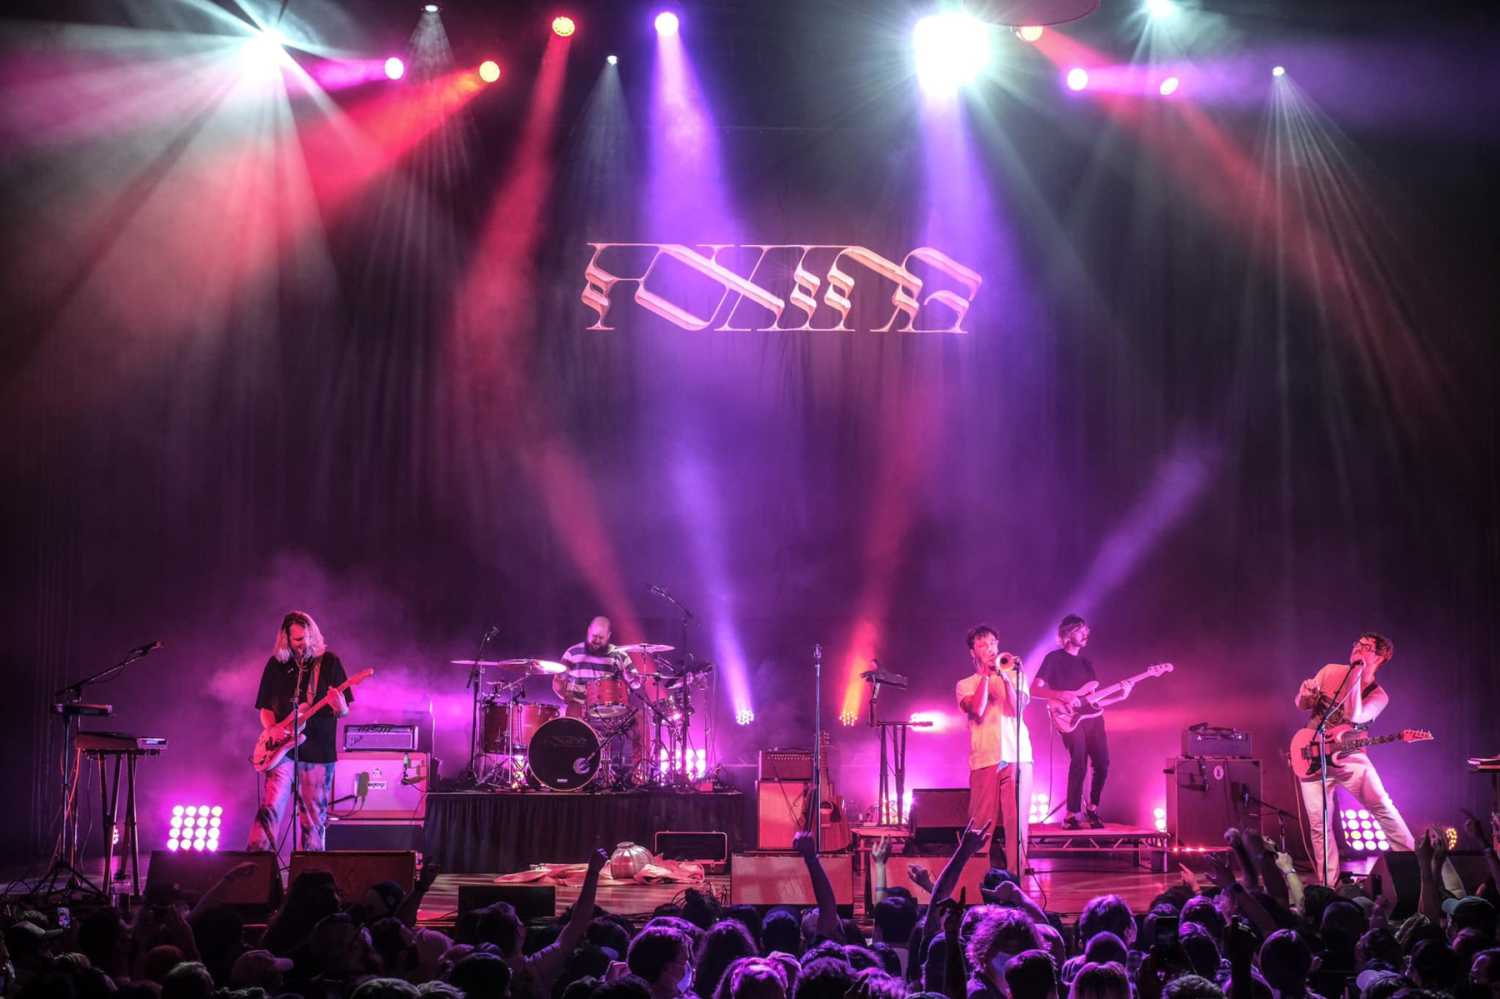 The album release show was staged at the Pageant theatre in St Louis